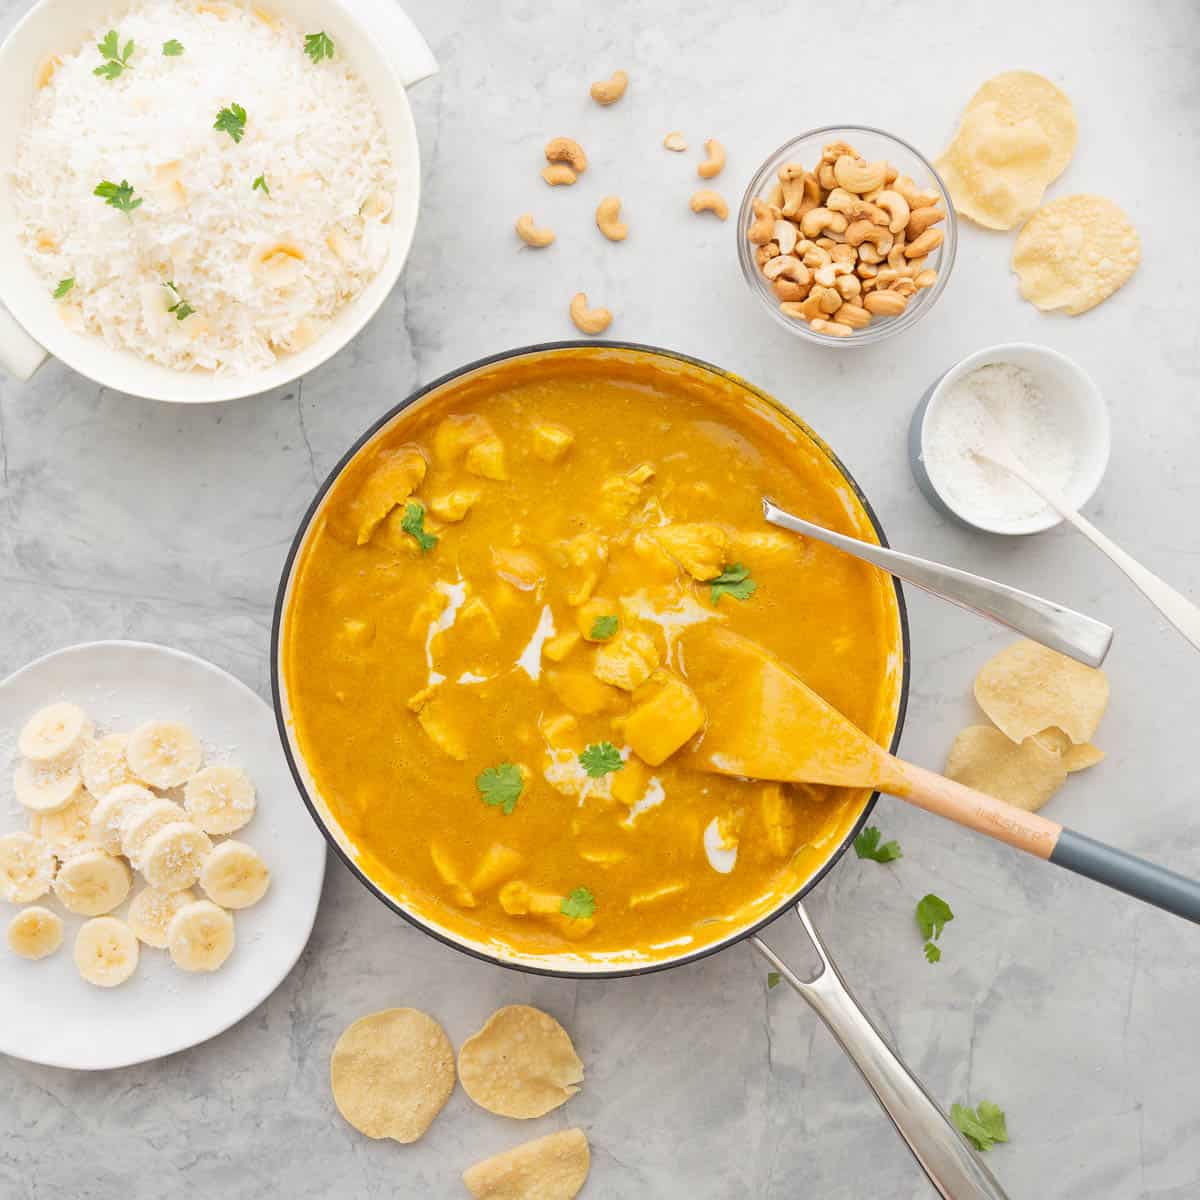 A large pan full of Mango Curry, drizzled with cream and sprinkled with parsley sitting on a bench next to a small bowl of cashew nuts, a ramekin of coconut, a bowl of rice and a plate of sliced bananas and poppadom's scattered over the bench